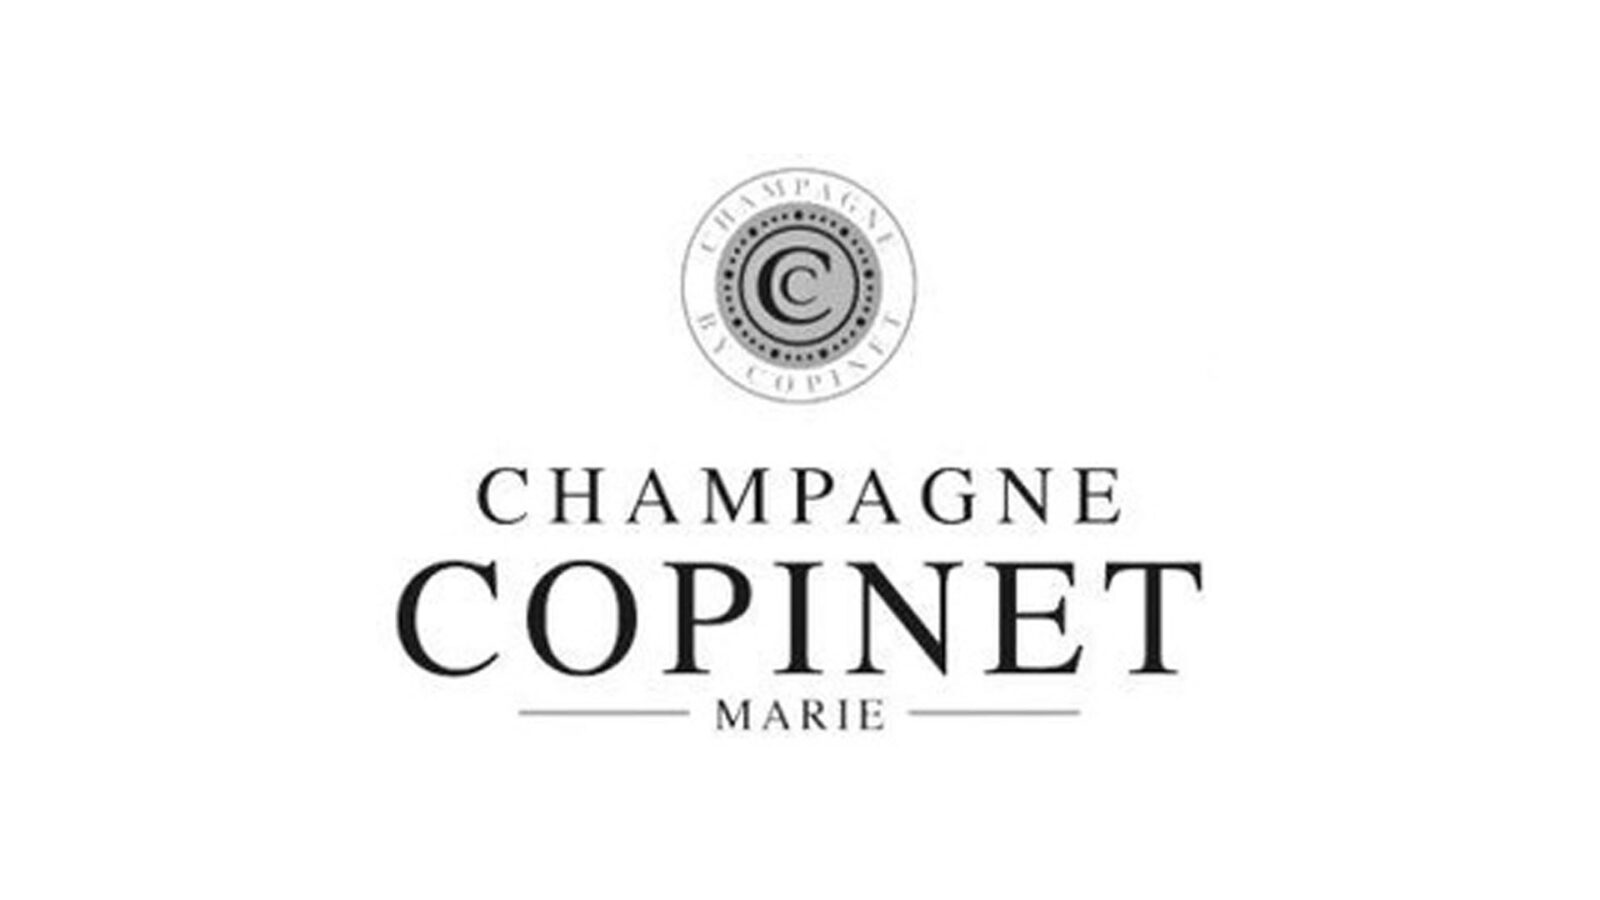 Champagne Marie Copinet